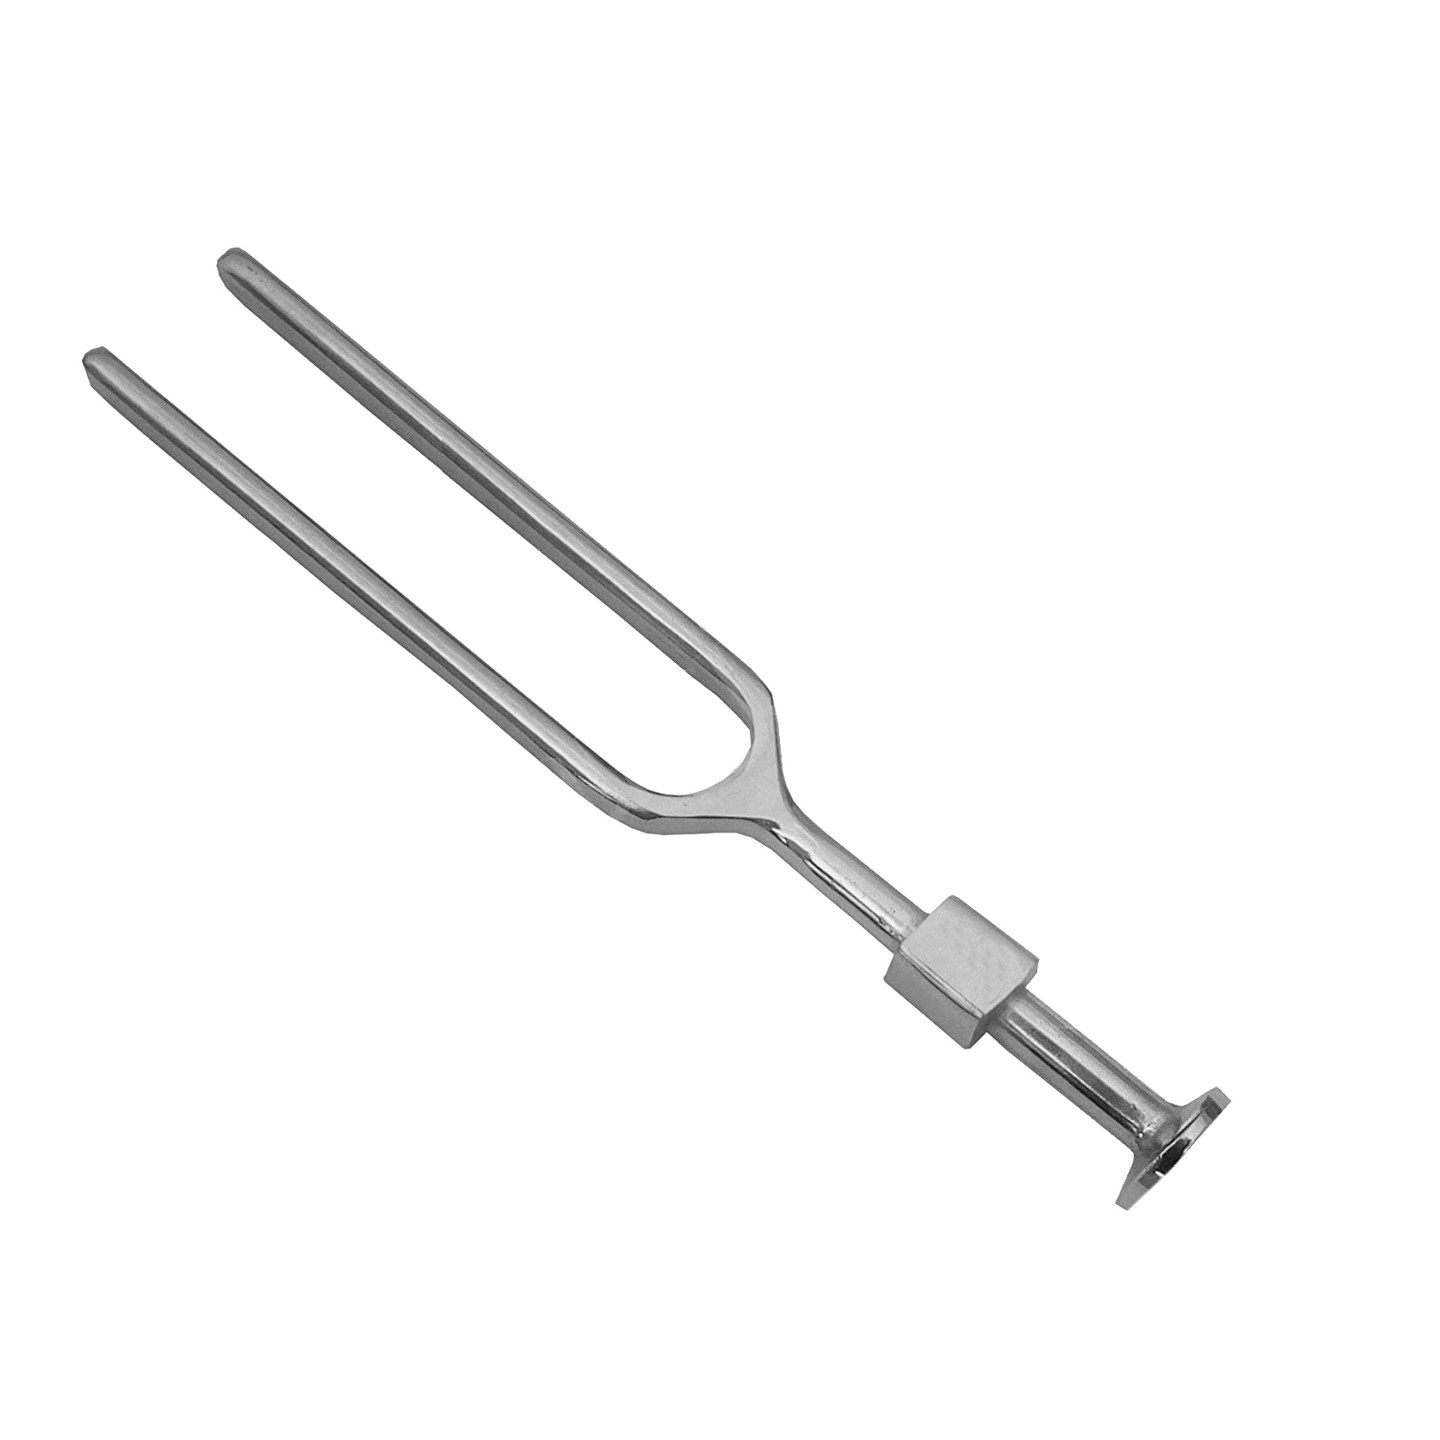 Vkare Stainless Steel Tuning Fork- 256 MHz